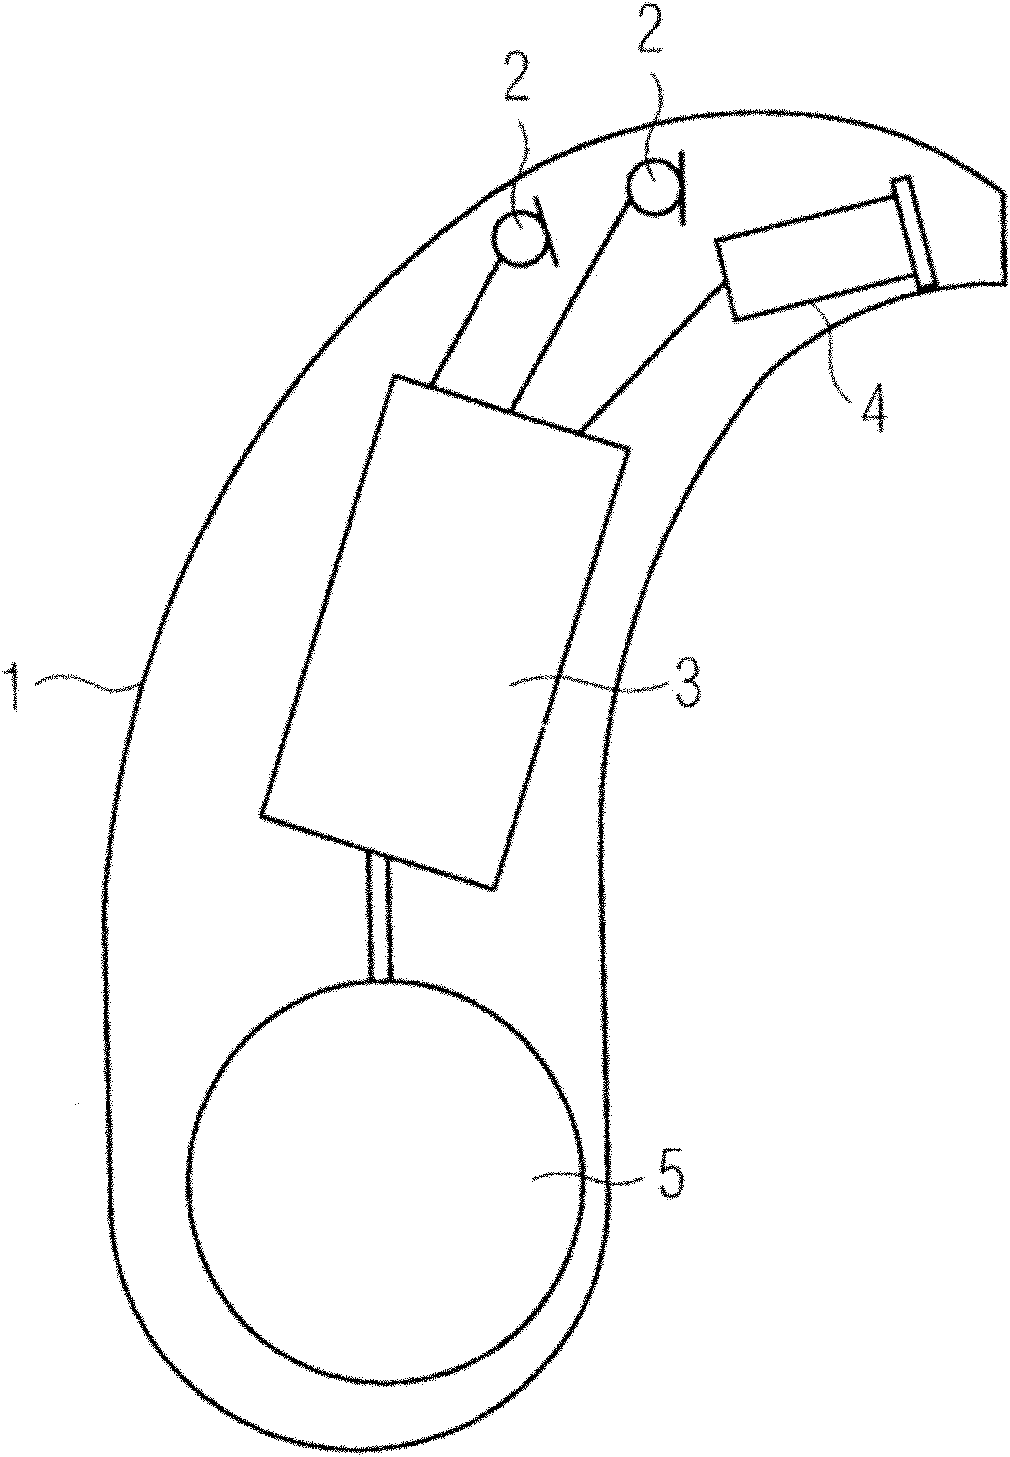 Hearing aid with removable attached earpiece